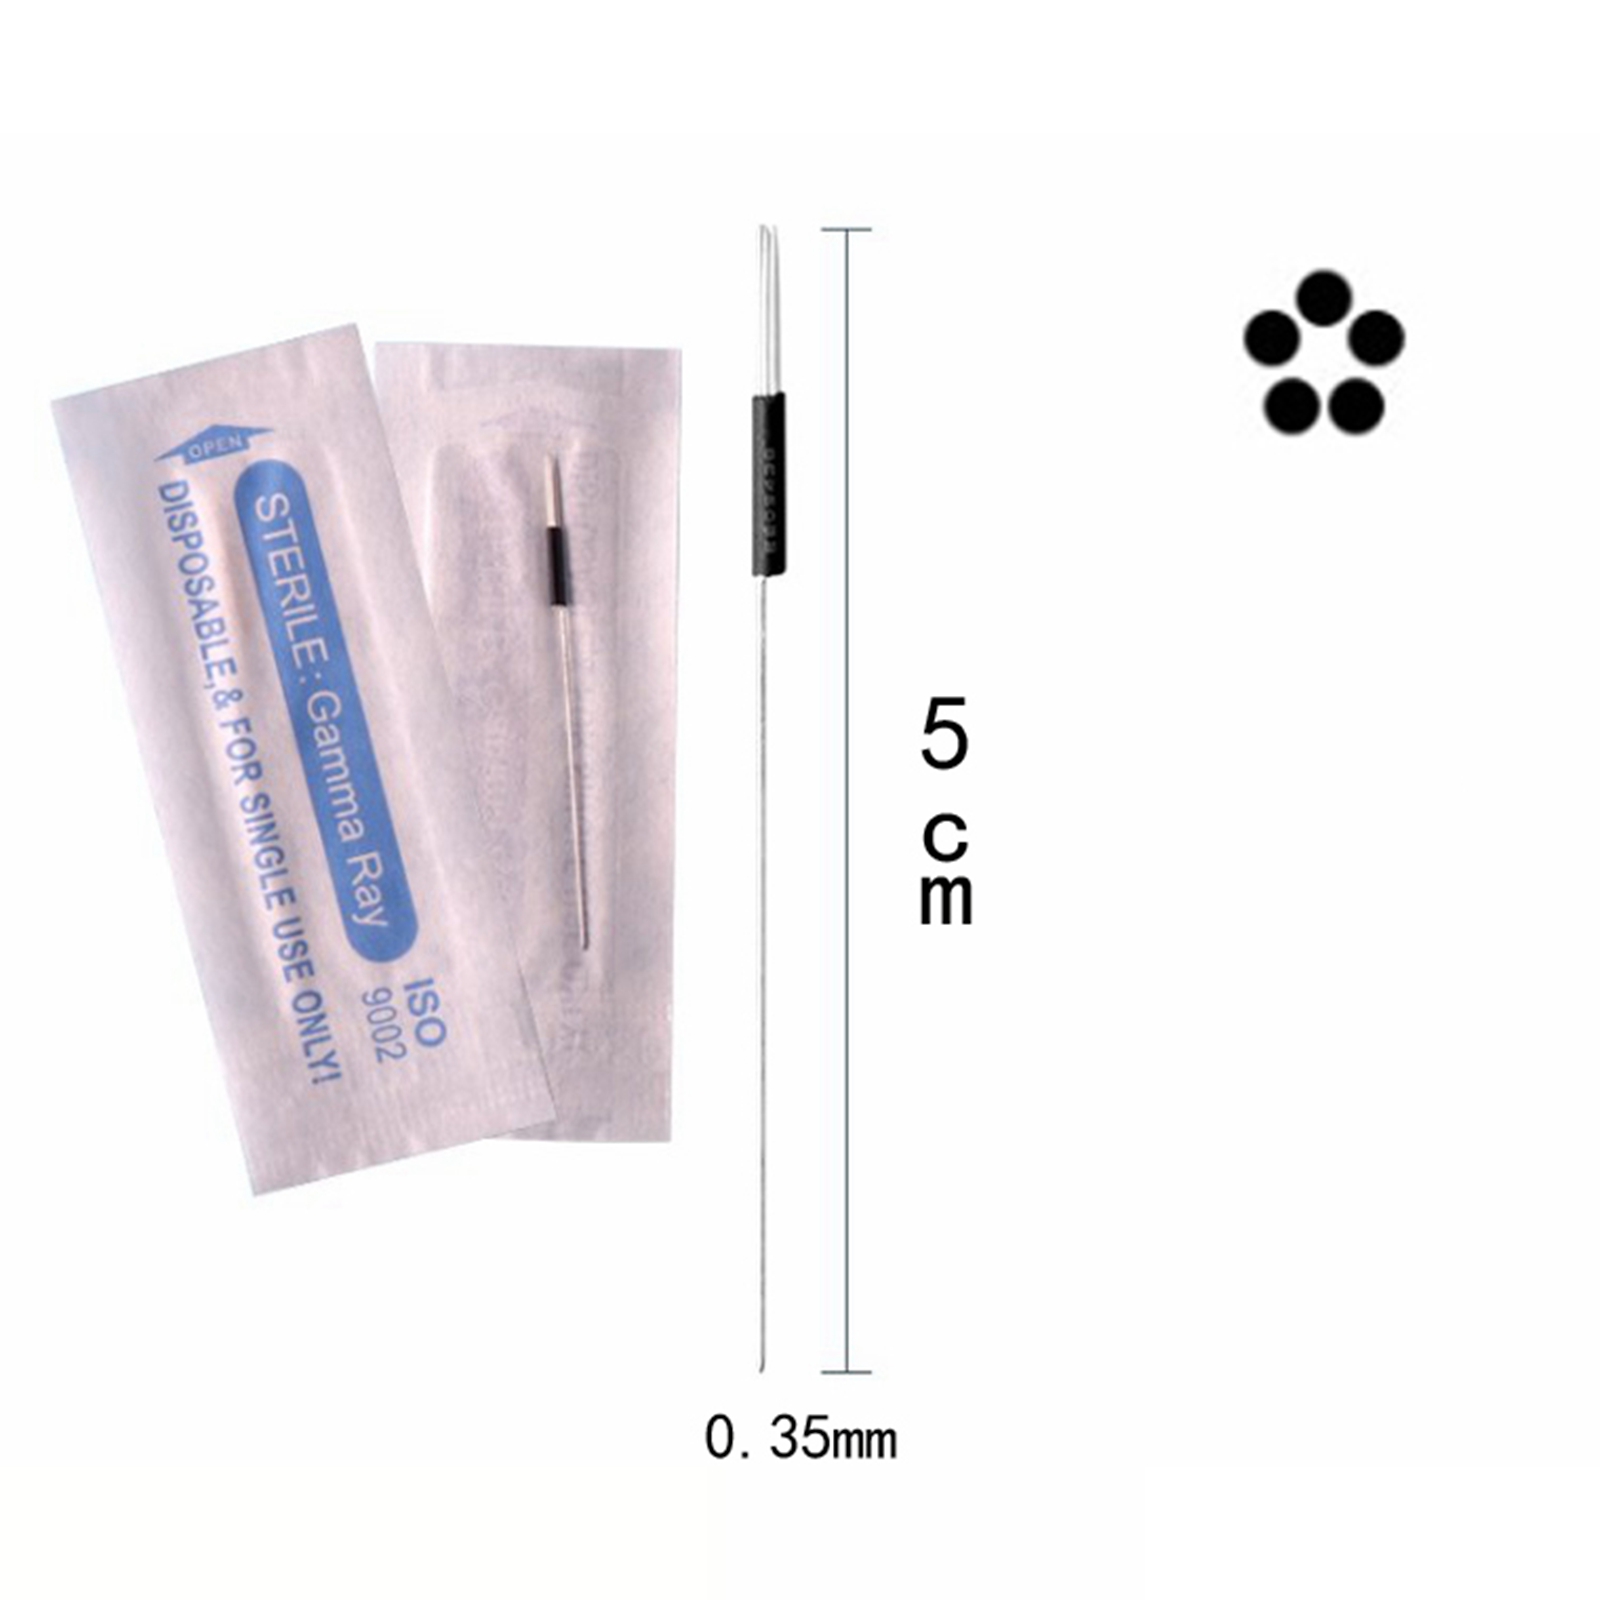 BoLin-Manufacturer Of Tattoo Disposable Needle For Tatto Makeup Machine-3